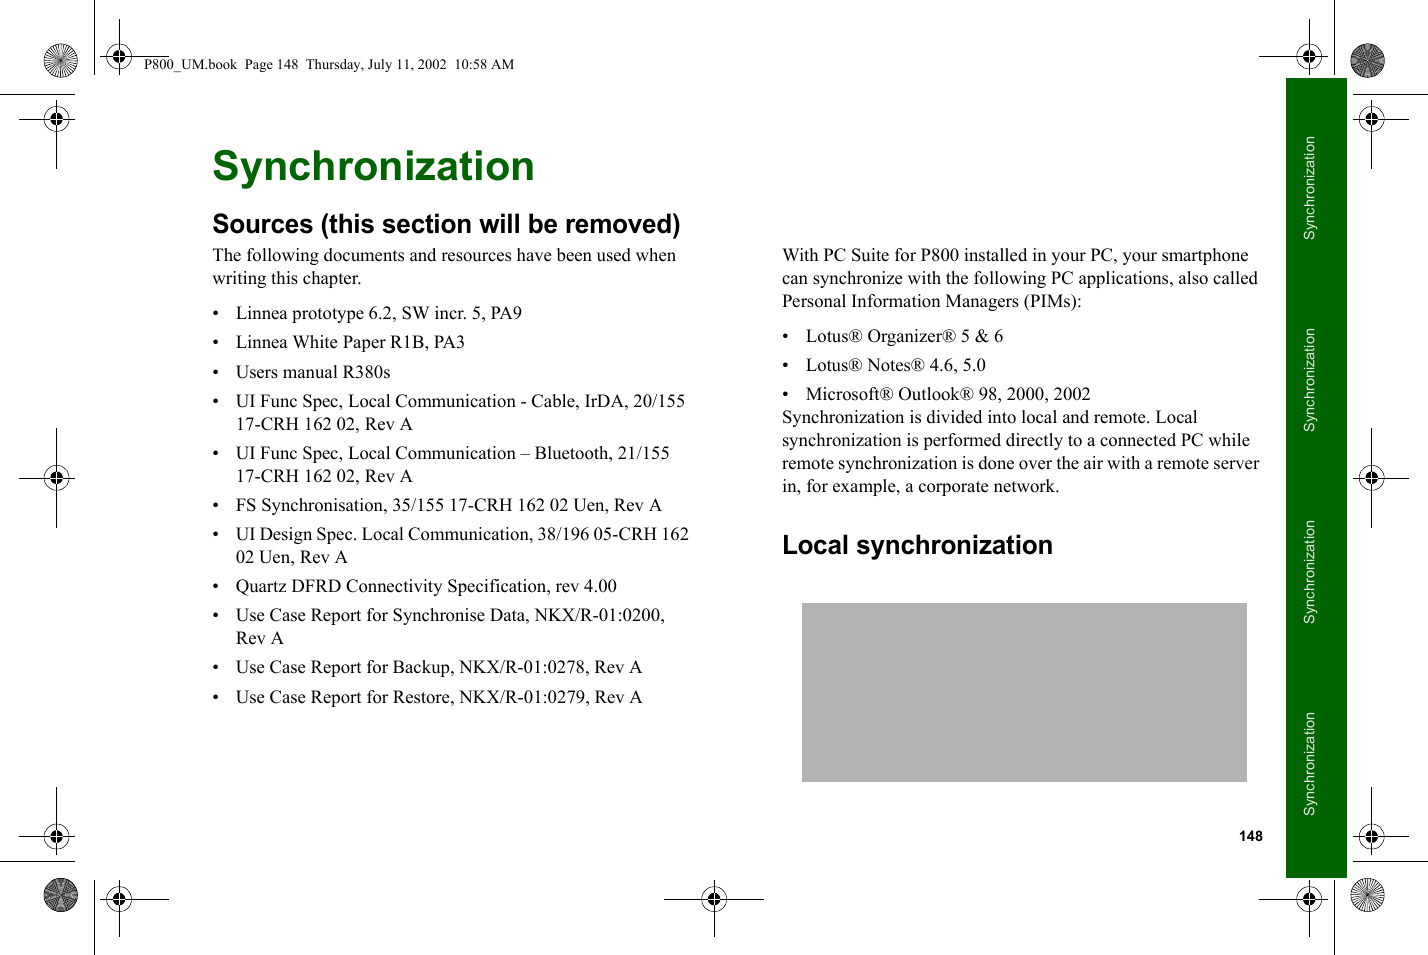 148SynchronizationSynchronizationSynchronizationSynchronizationSynchronizationSources (this section will be removed)The following documents and resources have been used when writing this chapter.• Linnea prototype 6.2, SW incr. 5, PA9• Linnea White Paper R1B, PA3• Users manual R380s• UI Func Spec, Local Communication - Cable, IrDA, 20/155 17-CRH 162 02, Rev A• UI Func Spec, Local Communication – Bluetooth, 21/155 17-CRH 162 02, Rev A• FS Synchronisation, 35/155 17-CRH 162 02 Uen, Rev A• UI Design Spec. Local Communication, 38/196 05-CRH 162 02 Uen, Rev A• Quartz DFRD Connectivity Specification, rev 4.00• Use Case Report for Synchronise Data, NKX/R-01:0200, Rev A• Use Case Report for Backup, NKX/R-01:0278, Rev A• Use Case Report for Restore, NKX/R-01:0279, Rev AWith PC Suite for P800 installed in your PC, your smartphone can synchronize with the following PC applications, also called Personal Information Managers (PIMs):• Lotus® Organizer® 5 &amp; 6• Lotus® Notes® 4.6, 5.0• Microsoft® Outlook® 98, 2000, 2002Synchronization is divided into local and remote. Local synchronization is performed directly to a connected PC while remote synchronization is done over the air with a remote server in, for example, a corporate network.Local synchronizationP800_UM.book  Page 148  Thursday, July 11, 2002  10:58 AM